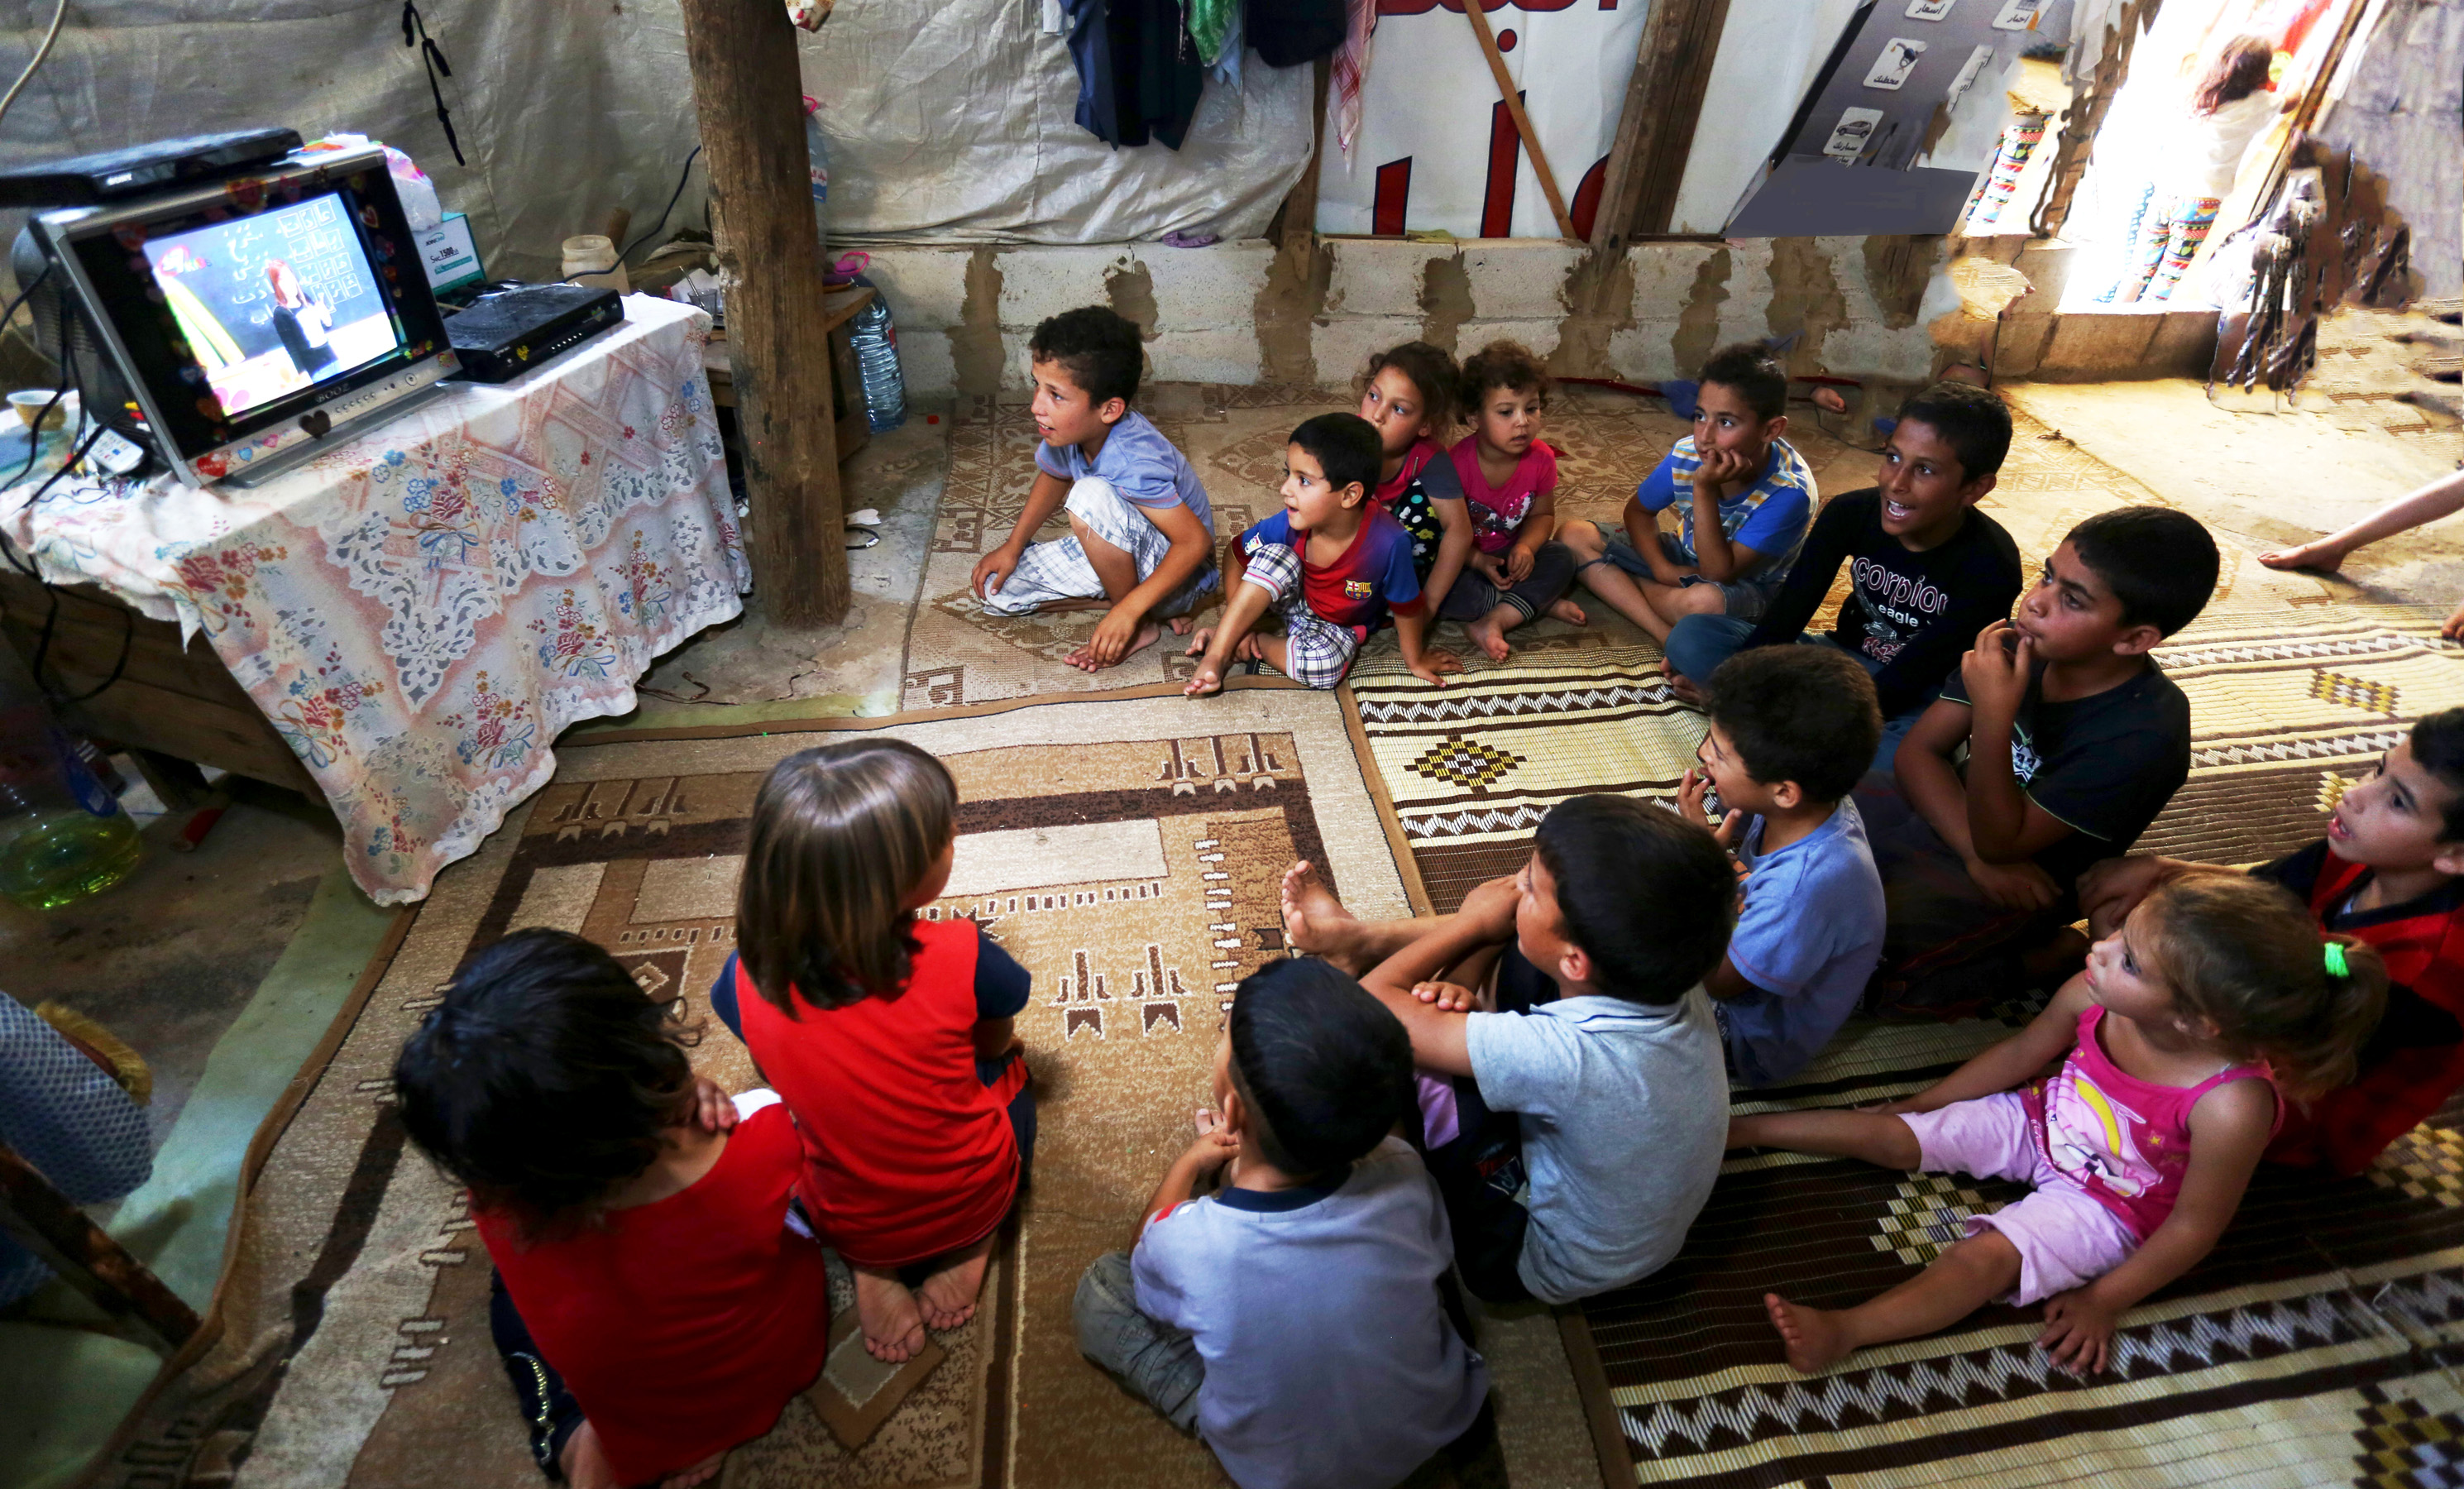 Young Syrian refugees in Lebanon watch a program from SAT-7.